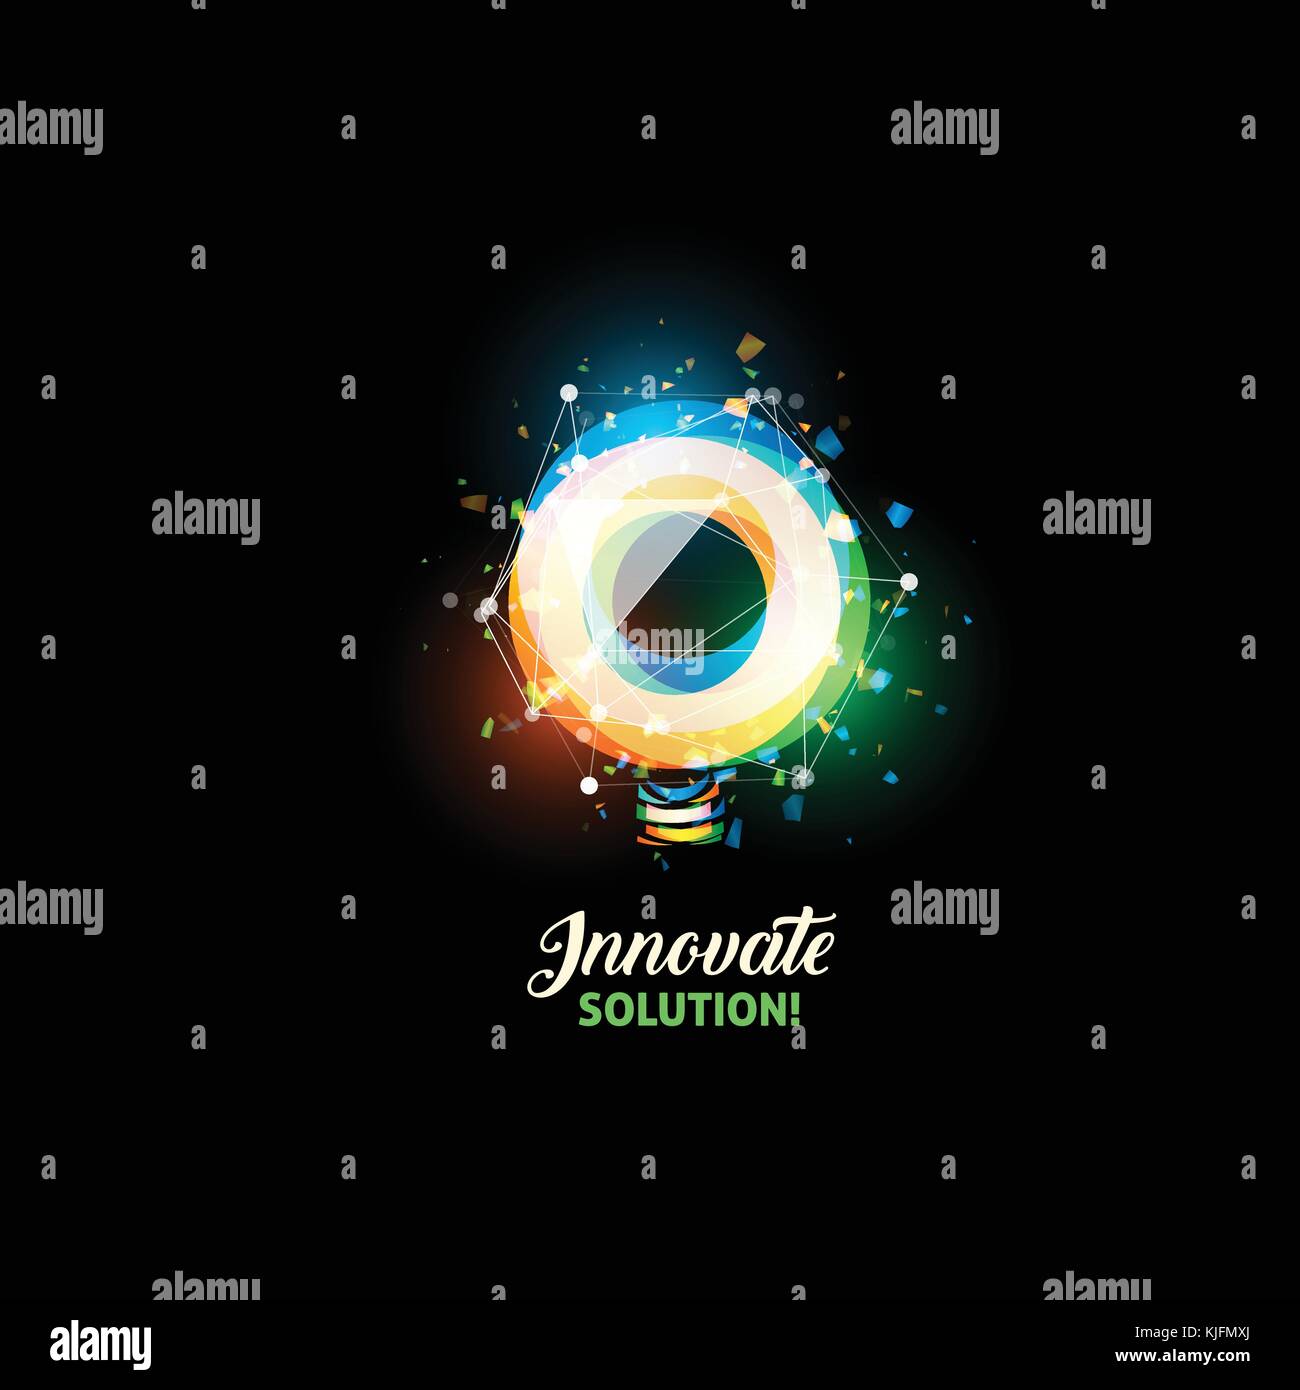 Innovate solution logo, light bulb abstract vector icon. Isolated colorful round shape, stylized lamp with text. Digital innovation technology vector illustration. Stock Vector